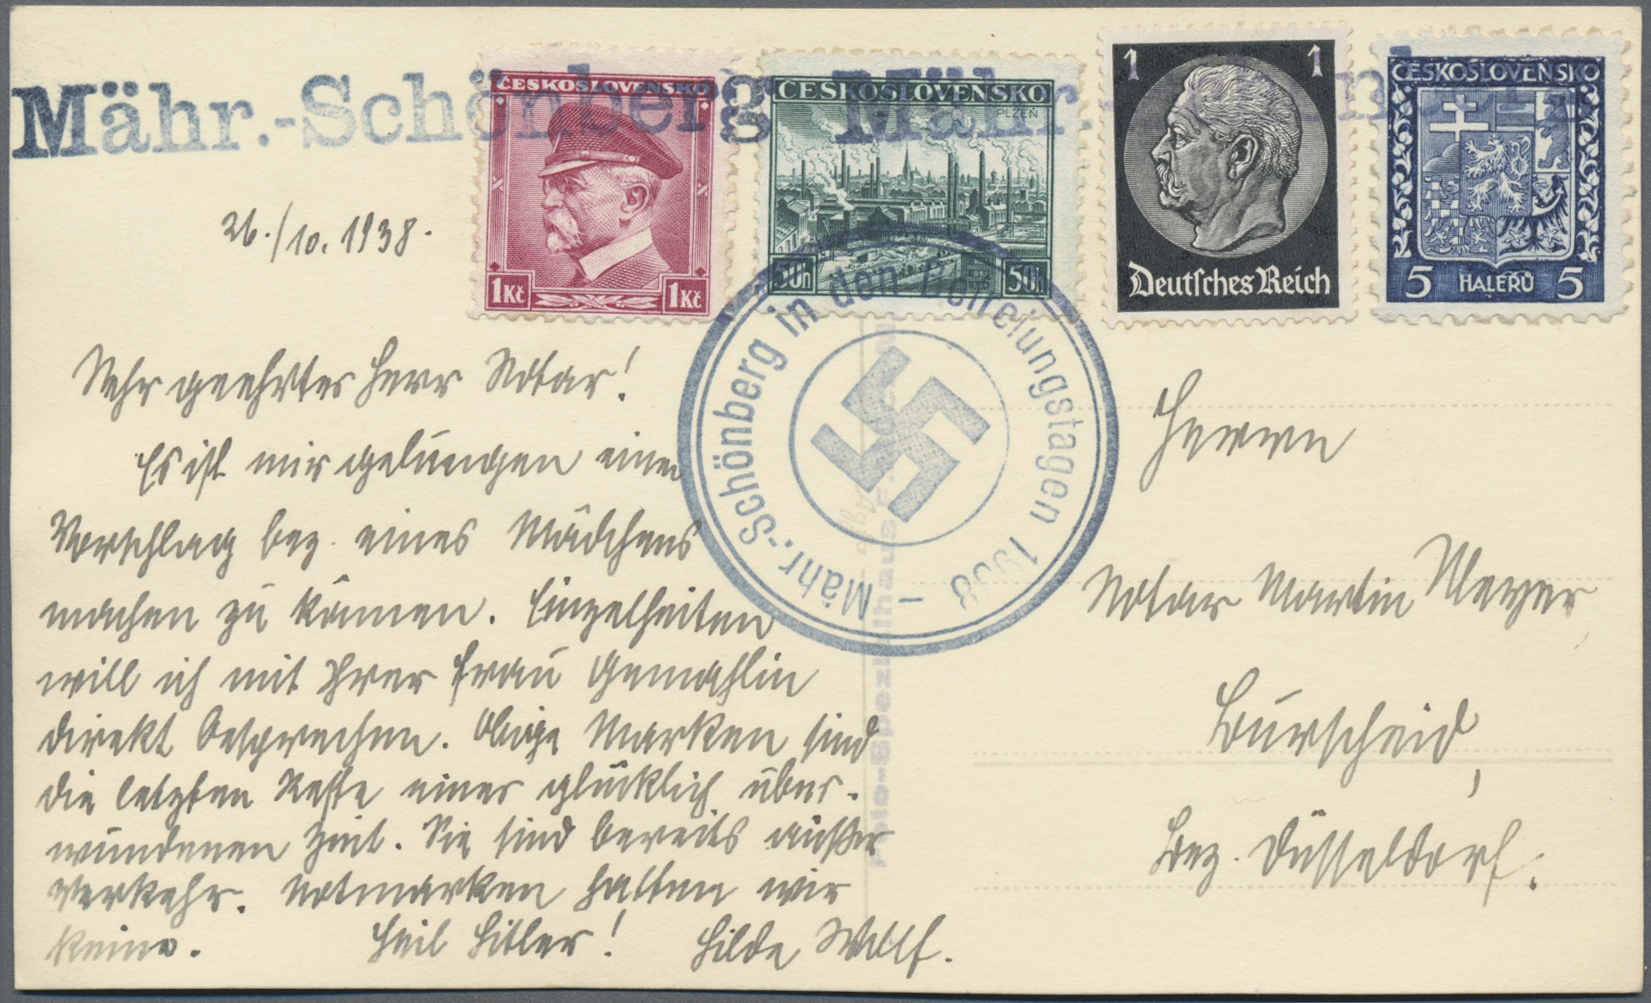 Lot 37077 - sudetenland  -  Auktionshaus Christoph Gärtner GmbH & Co. KG Sale #44 Collections Germany